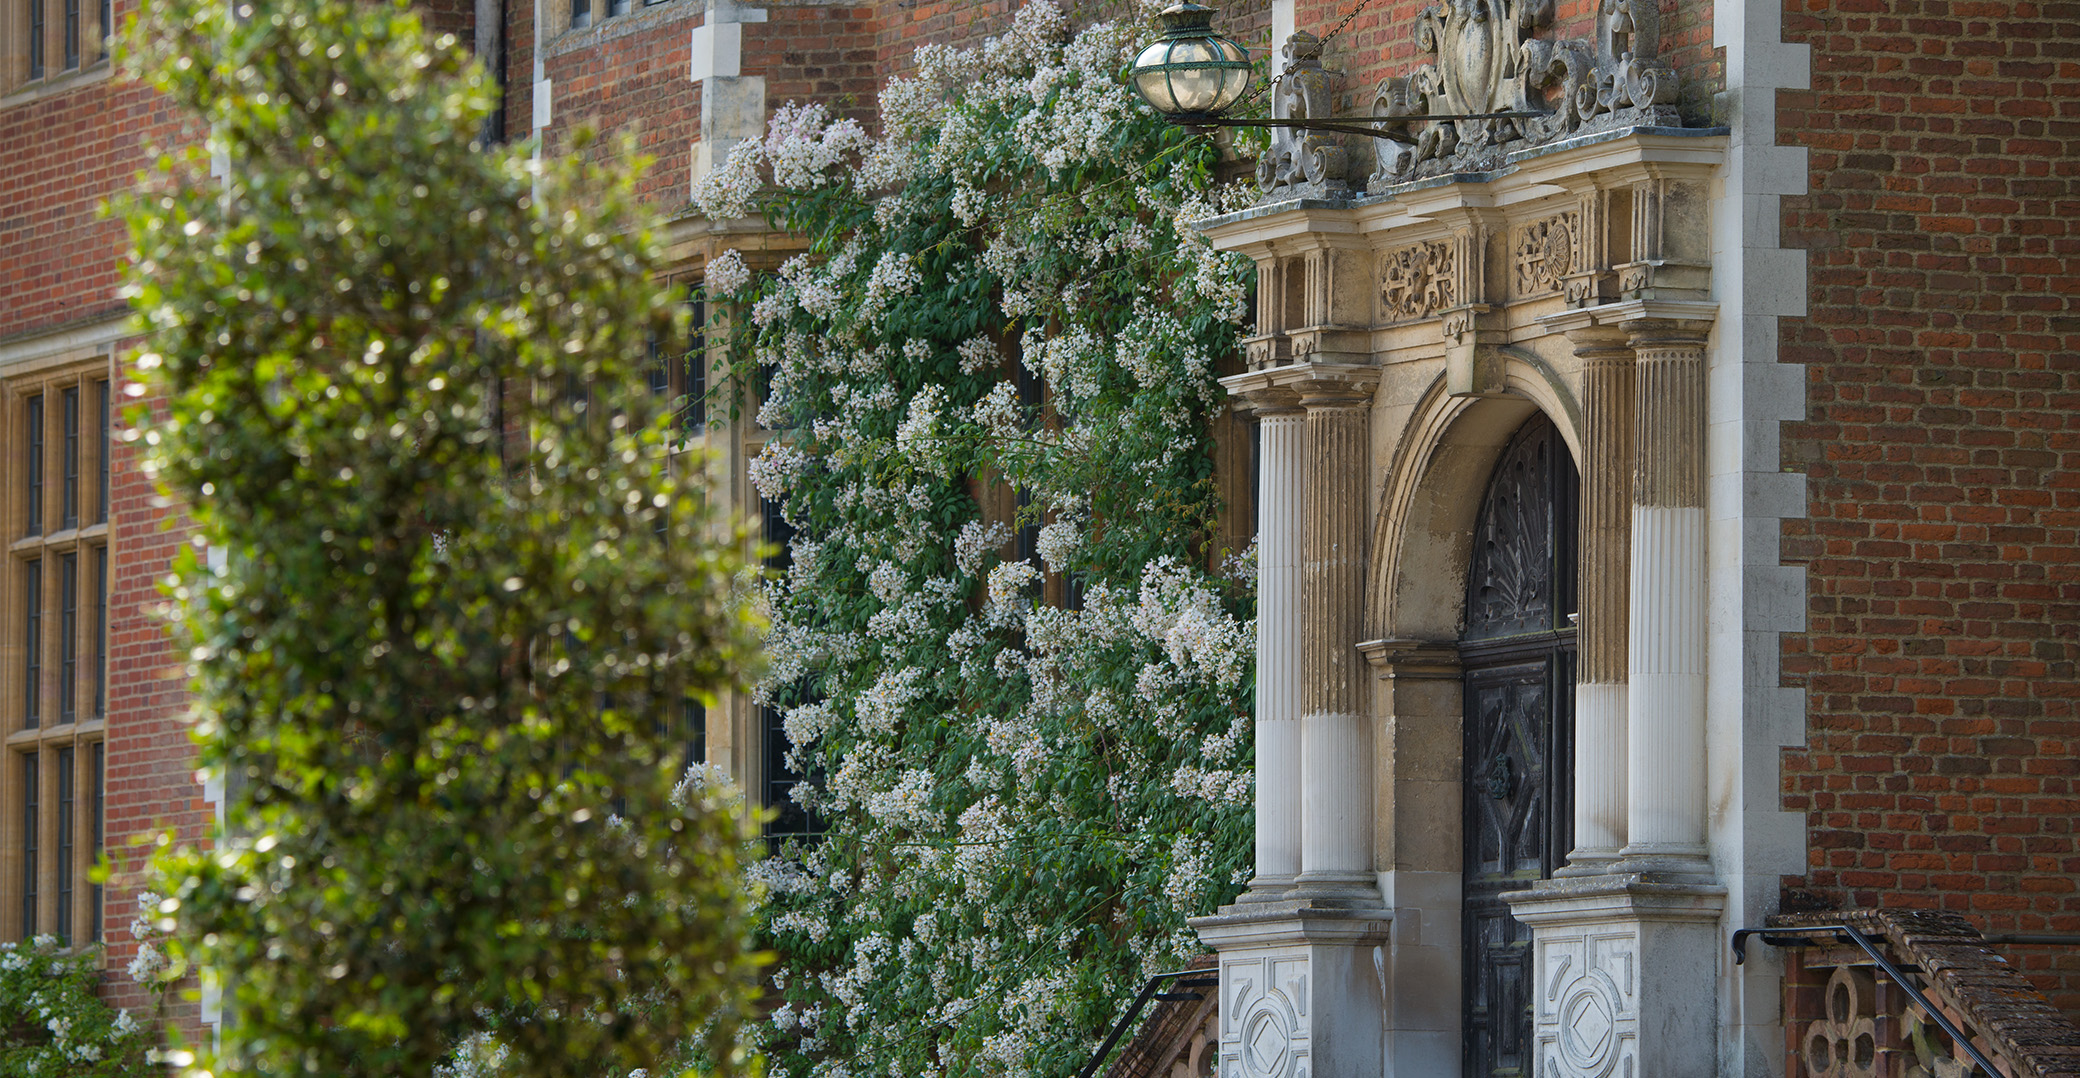 Hatfield House is now closed for the season. - Hatfield House